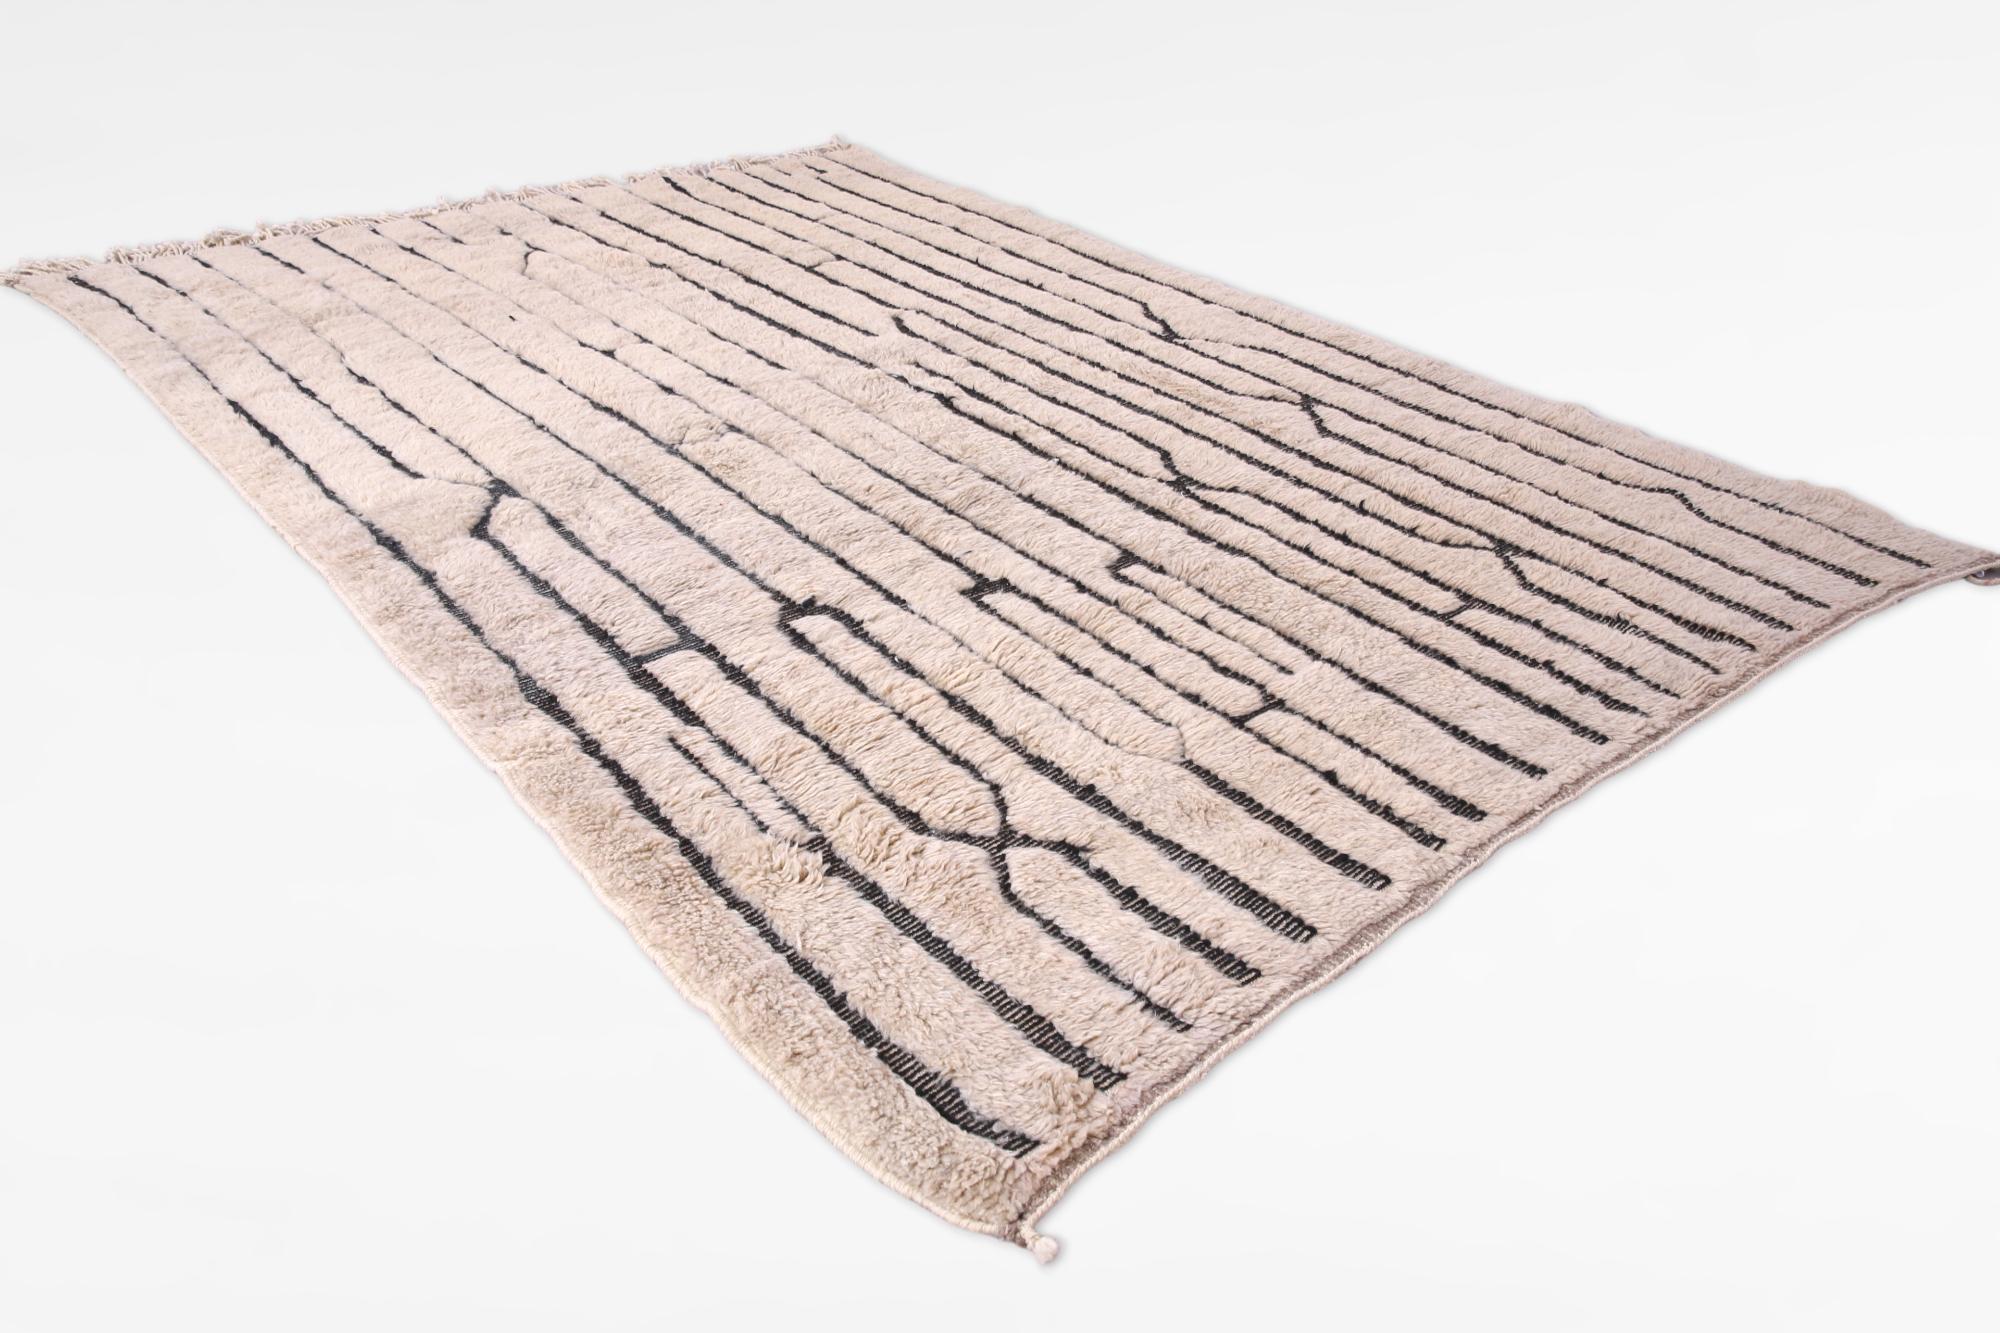 This modern-style, original Mrirt rug is handcrafted by talented artisans in the Khenifra region of the Atlas Mountains in Morocco. Here, groups of women continue the ancient tradition of hand-weaving on traditional vertical looms to produce these